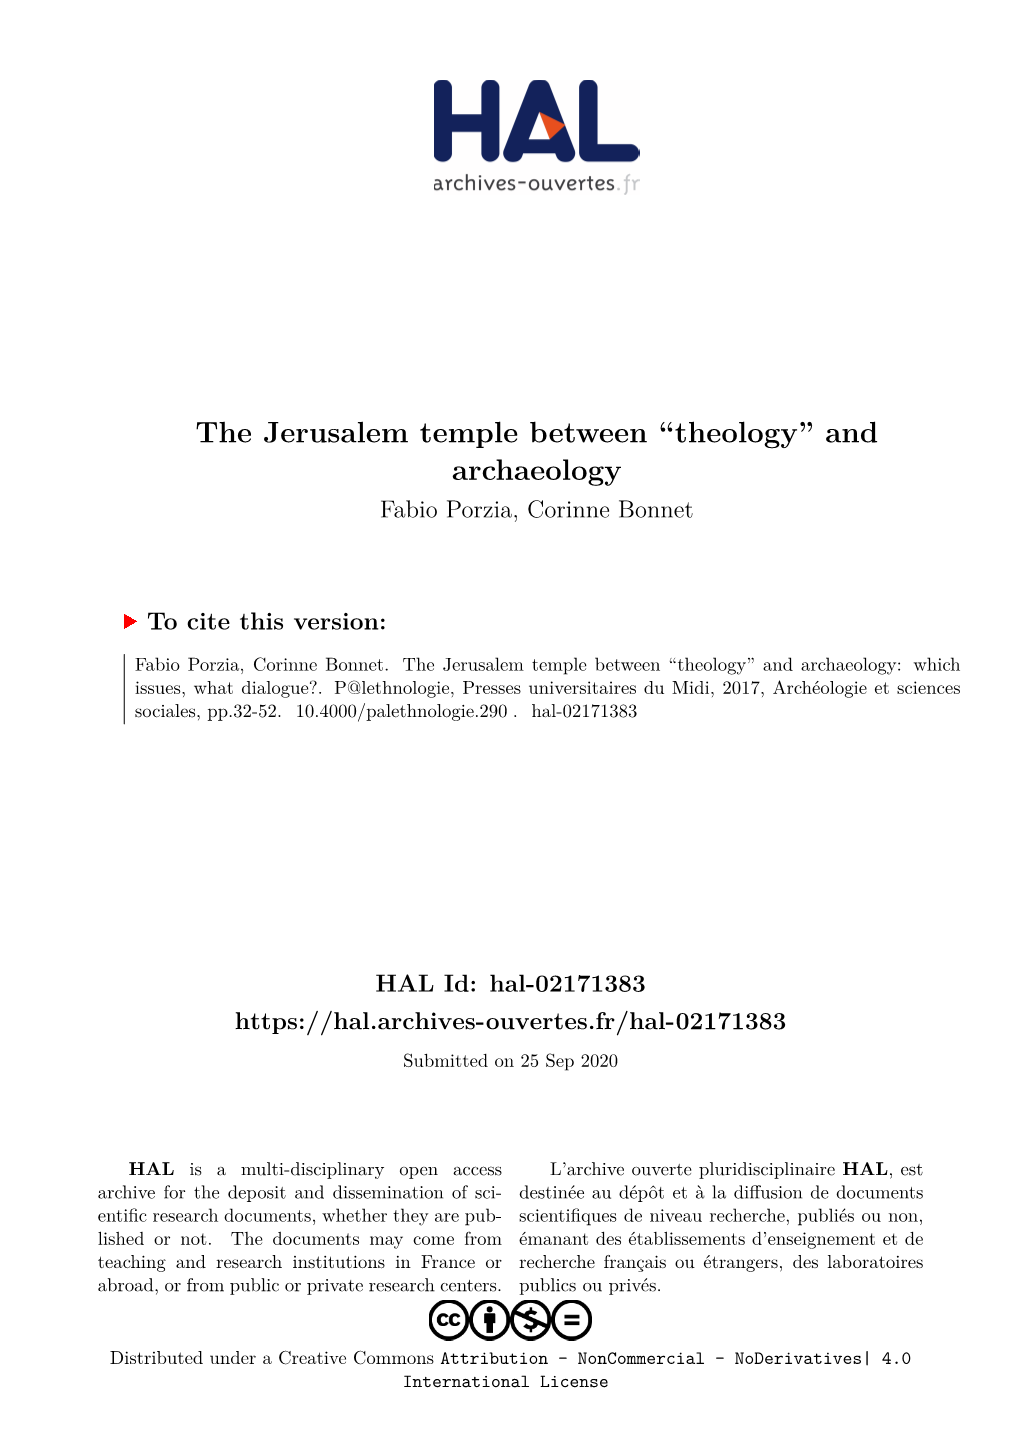 The Jerusalem Temple Between ``Theology'' and Archaeology